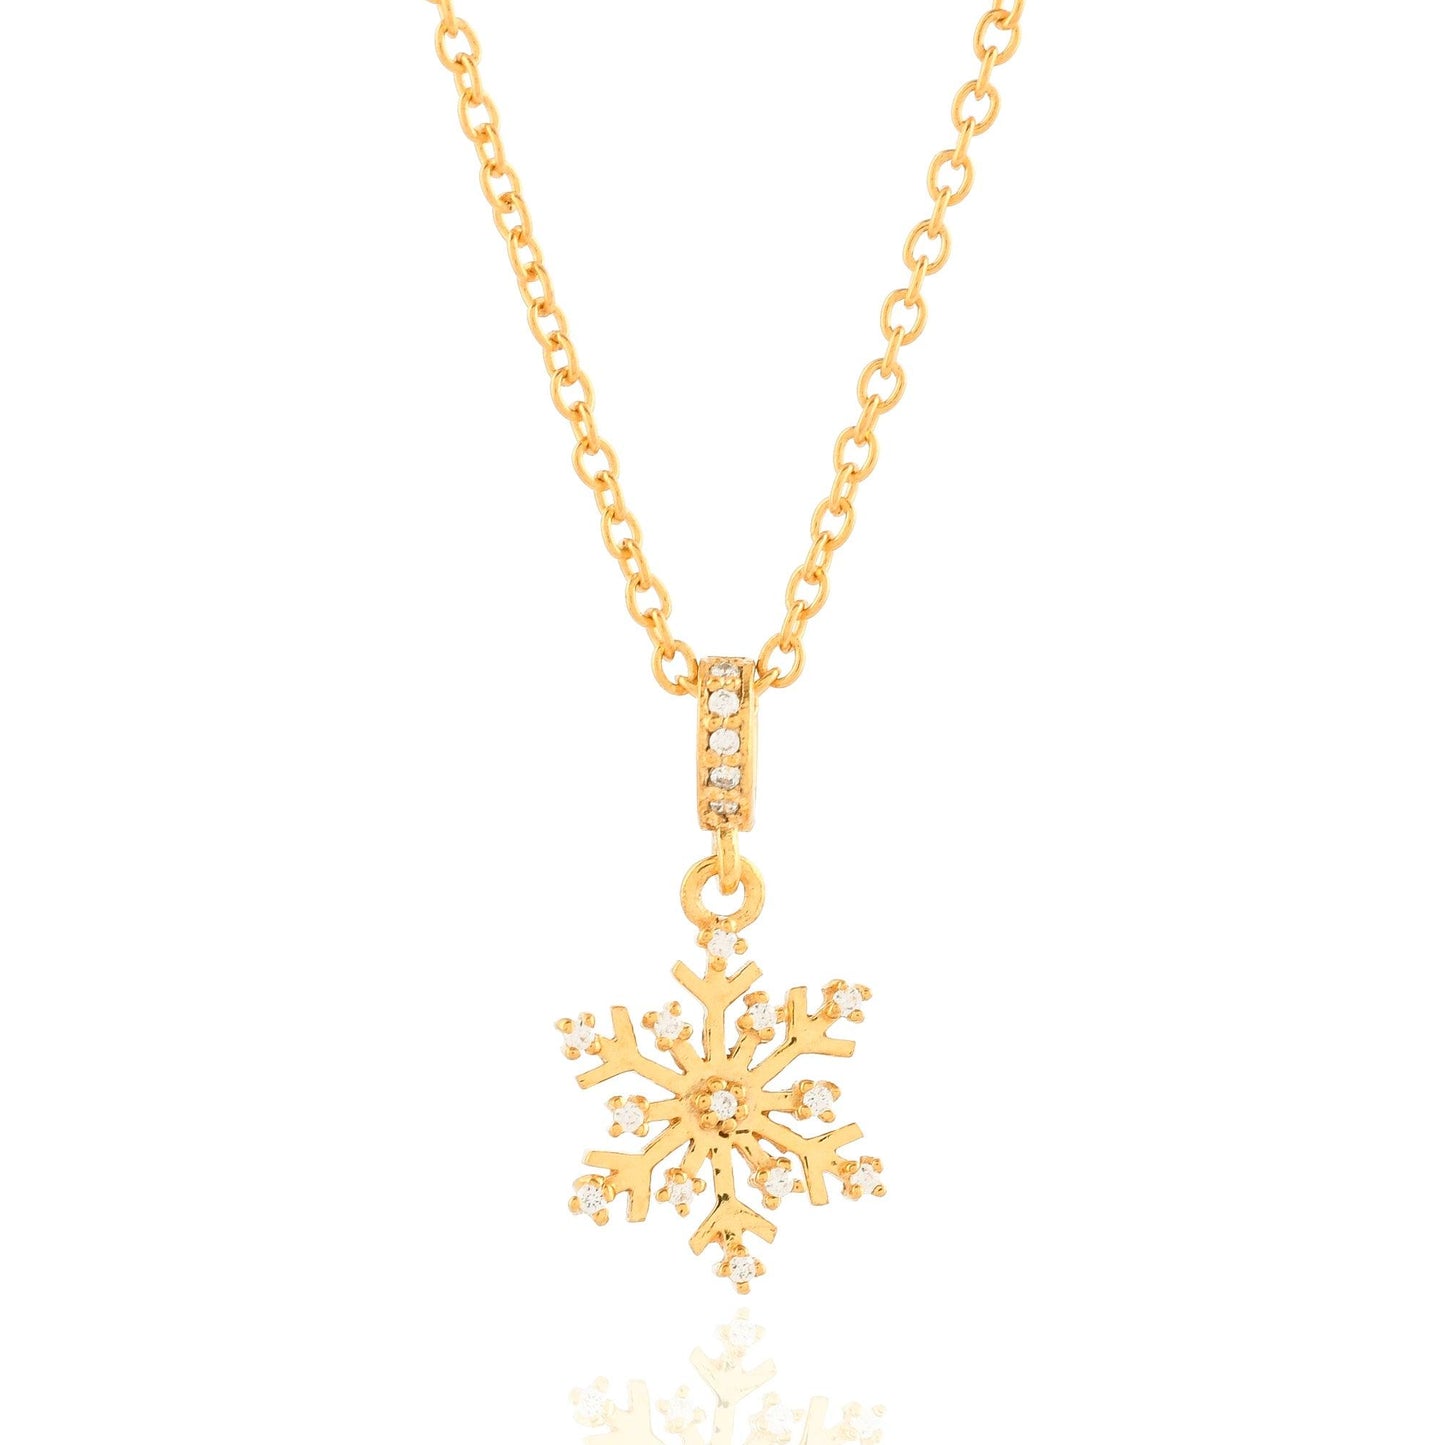 Snowflake Silver Necklace - From Purl Purl